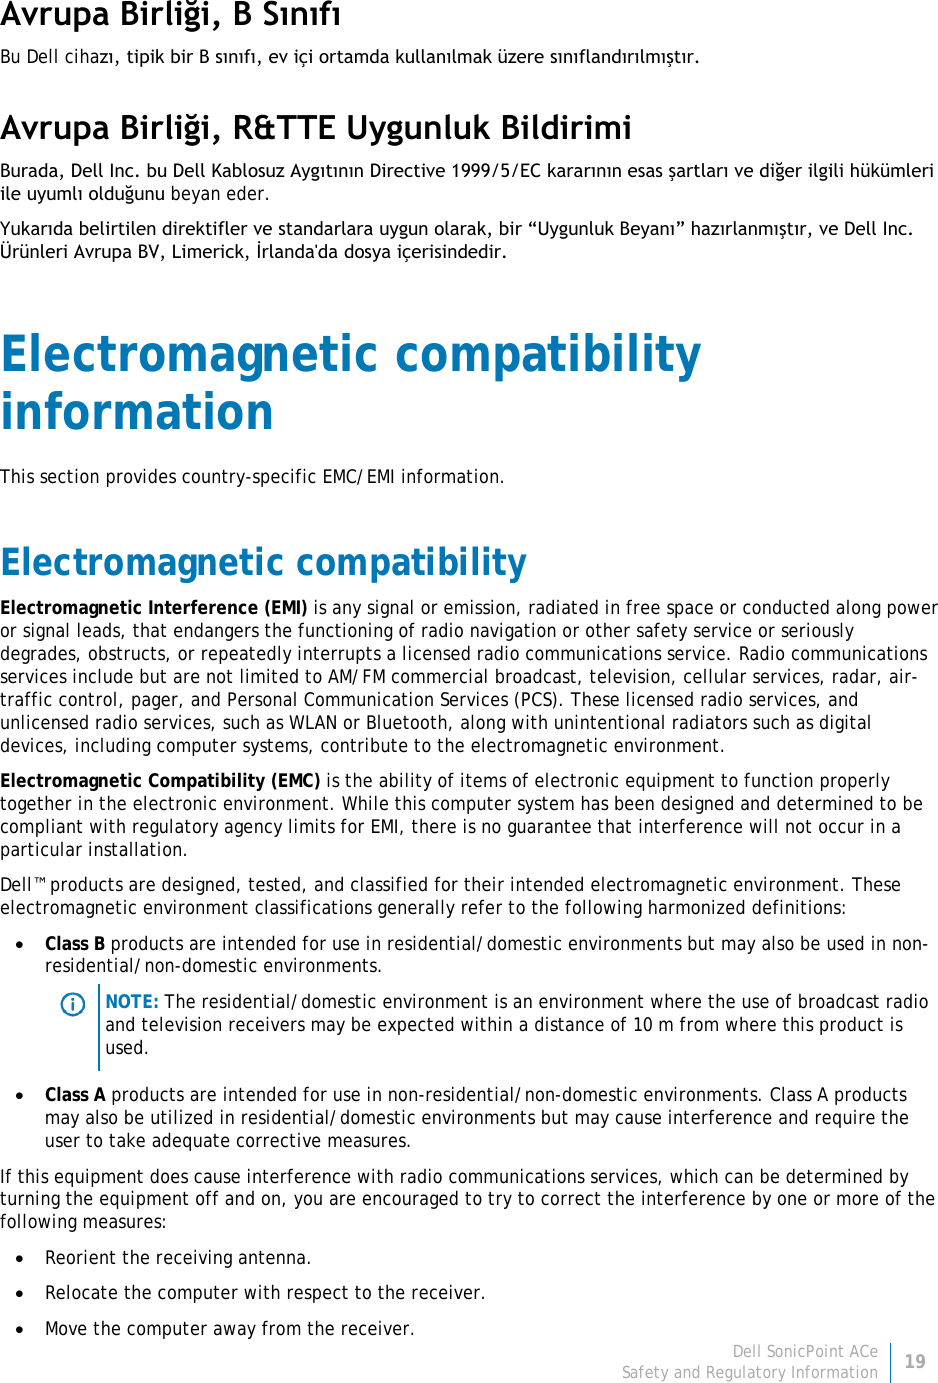 Dell SonicPoint ACe 19 Safety and Regulatory Information     Avrupa Birliği, B Sınıfı Bu Dell cihazı, tipik bir B sınıfı, ev içi ortamda kullanılmak üzere sınıflandırılmıştır.  Avrupa Birliği, R&amp;TTE Uygunluk Bildirimi  Burada, Dell Inc. bu Dell Kablosuz Aygıtının Directive 1999/5/EC kararının esas şartları ve diğer ilgili hükümleri ile uyumlı olduğunu beyan eder. Yukarıda belirtilen direktifler ve standarlara uygun olarak, bir “Uygunluk Beyanı” hazırlanmıştır, ve Dell Inc. Ürünleri Avrupa BV, Limerick, İrlanda&apos;da dosya içerisindedir. Electromagnetic compatibility information This section provides country-specific EMC/EMI information. Electromagnetic compatibility Electromagnetic Interference (EMI) is any signal or emission, radiated in free space or conducted along power or signal leads, that endangers the functioning of radio navigation or other safety service or seriously degrades, obstructs, or repeatedly interrupts a licensed radio communications service. Radio communications services include but are not limited to AM/FM commercial broadcast, television, cellular services, radar, air-traffic control, pager, and Personal Communication Services (PCS). These licensed radio services, and unlicensed radio services, such as WLAN or Bluetooth, along with unintentional radiators such as digital devices, including computer systems, contribute to the electromagnetic environment. Electromagnetic Compatibility (EMC) is the ability of items of electronic equipment to function properly together in the electronic environment. While this computer system has been designed and determined to be compliant with regulatory agency limits for EMI, there is no guarantee that interference will not occur in a particular installation.  Dell™ products are designed, tested, and classified for their intended electromagnetic environment. These electromagnetic environment classifications generally refer to the following harmonized definitions: • Class B products are intended for use in residential/domestic environments but may also be used in non-residential/non-domestic environments.  NOTE: The residential/domestic environment is an environment where the use of broadcast radio and television receivers may be expected within a distance of 10 m from where this product is used. • Class A products are intended for use in non-residential/non-domestic environments. Class A products may also be utilized in residential/domestic environments but may cause interference and require the user to take adequate corrective measures. If this equipment does cause interference with radio communications services, which can be determined by turning the equipment off and on, you are encouraged to try to correct the interference by one or more of the following measures: • Reorient the receiving antenna. • Relocate the computer with respect to the receiver. • Move the computer away from the receiver. 